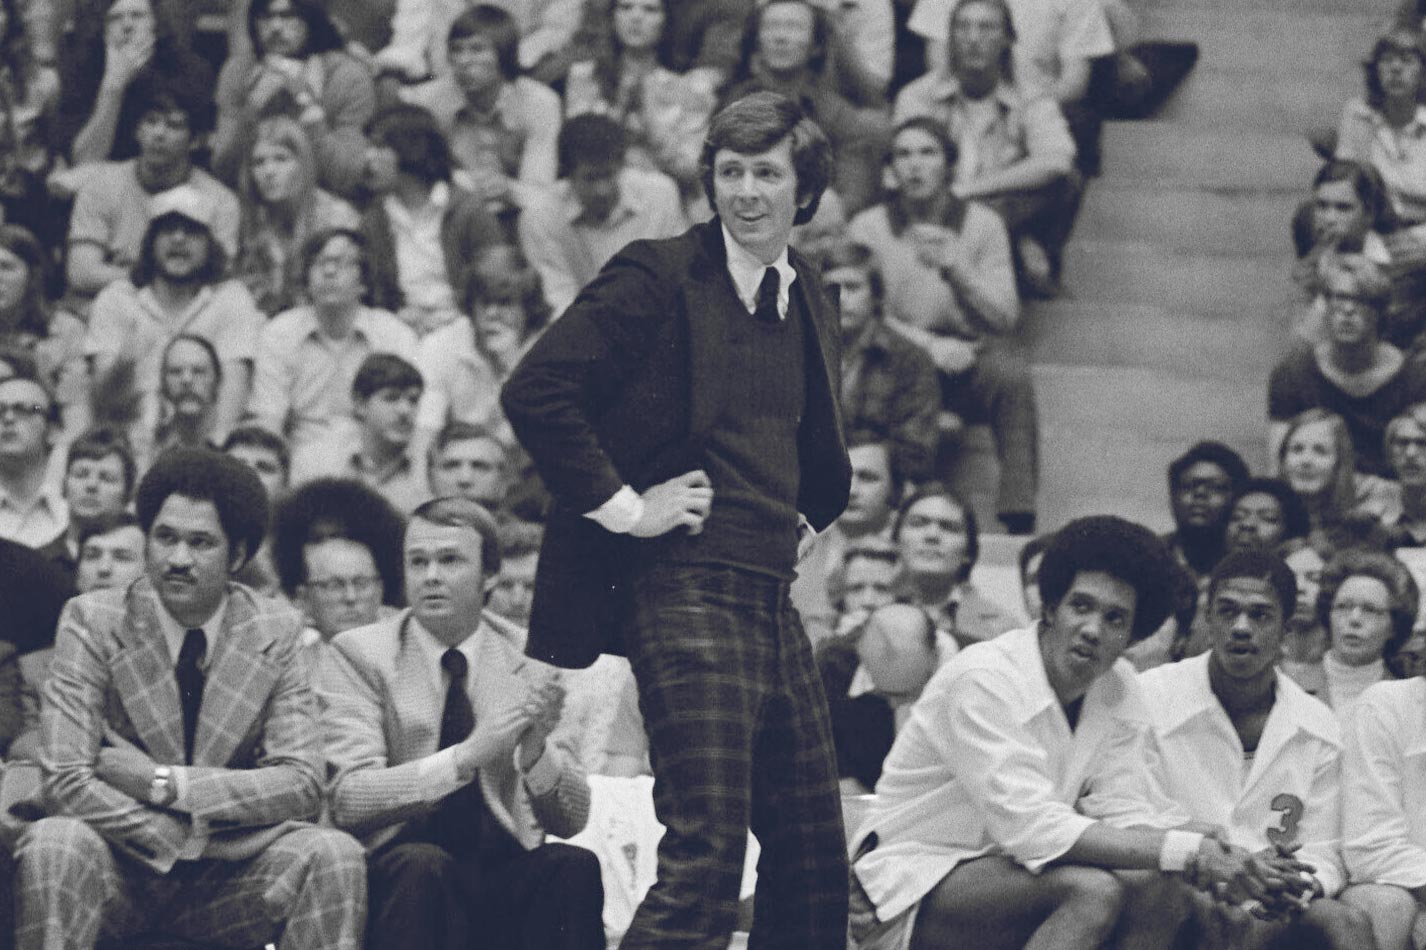 Terry Holland standing watching his basketball team play. Black and White image